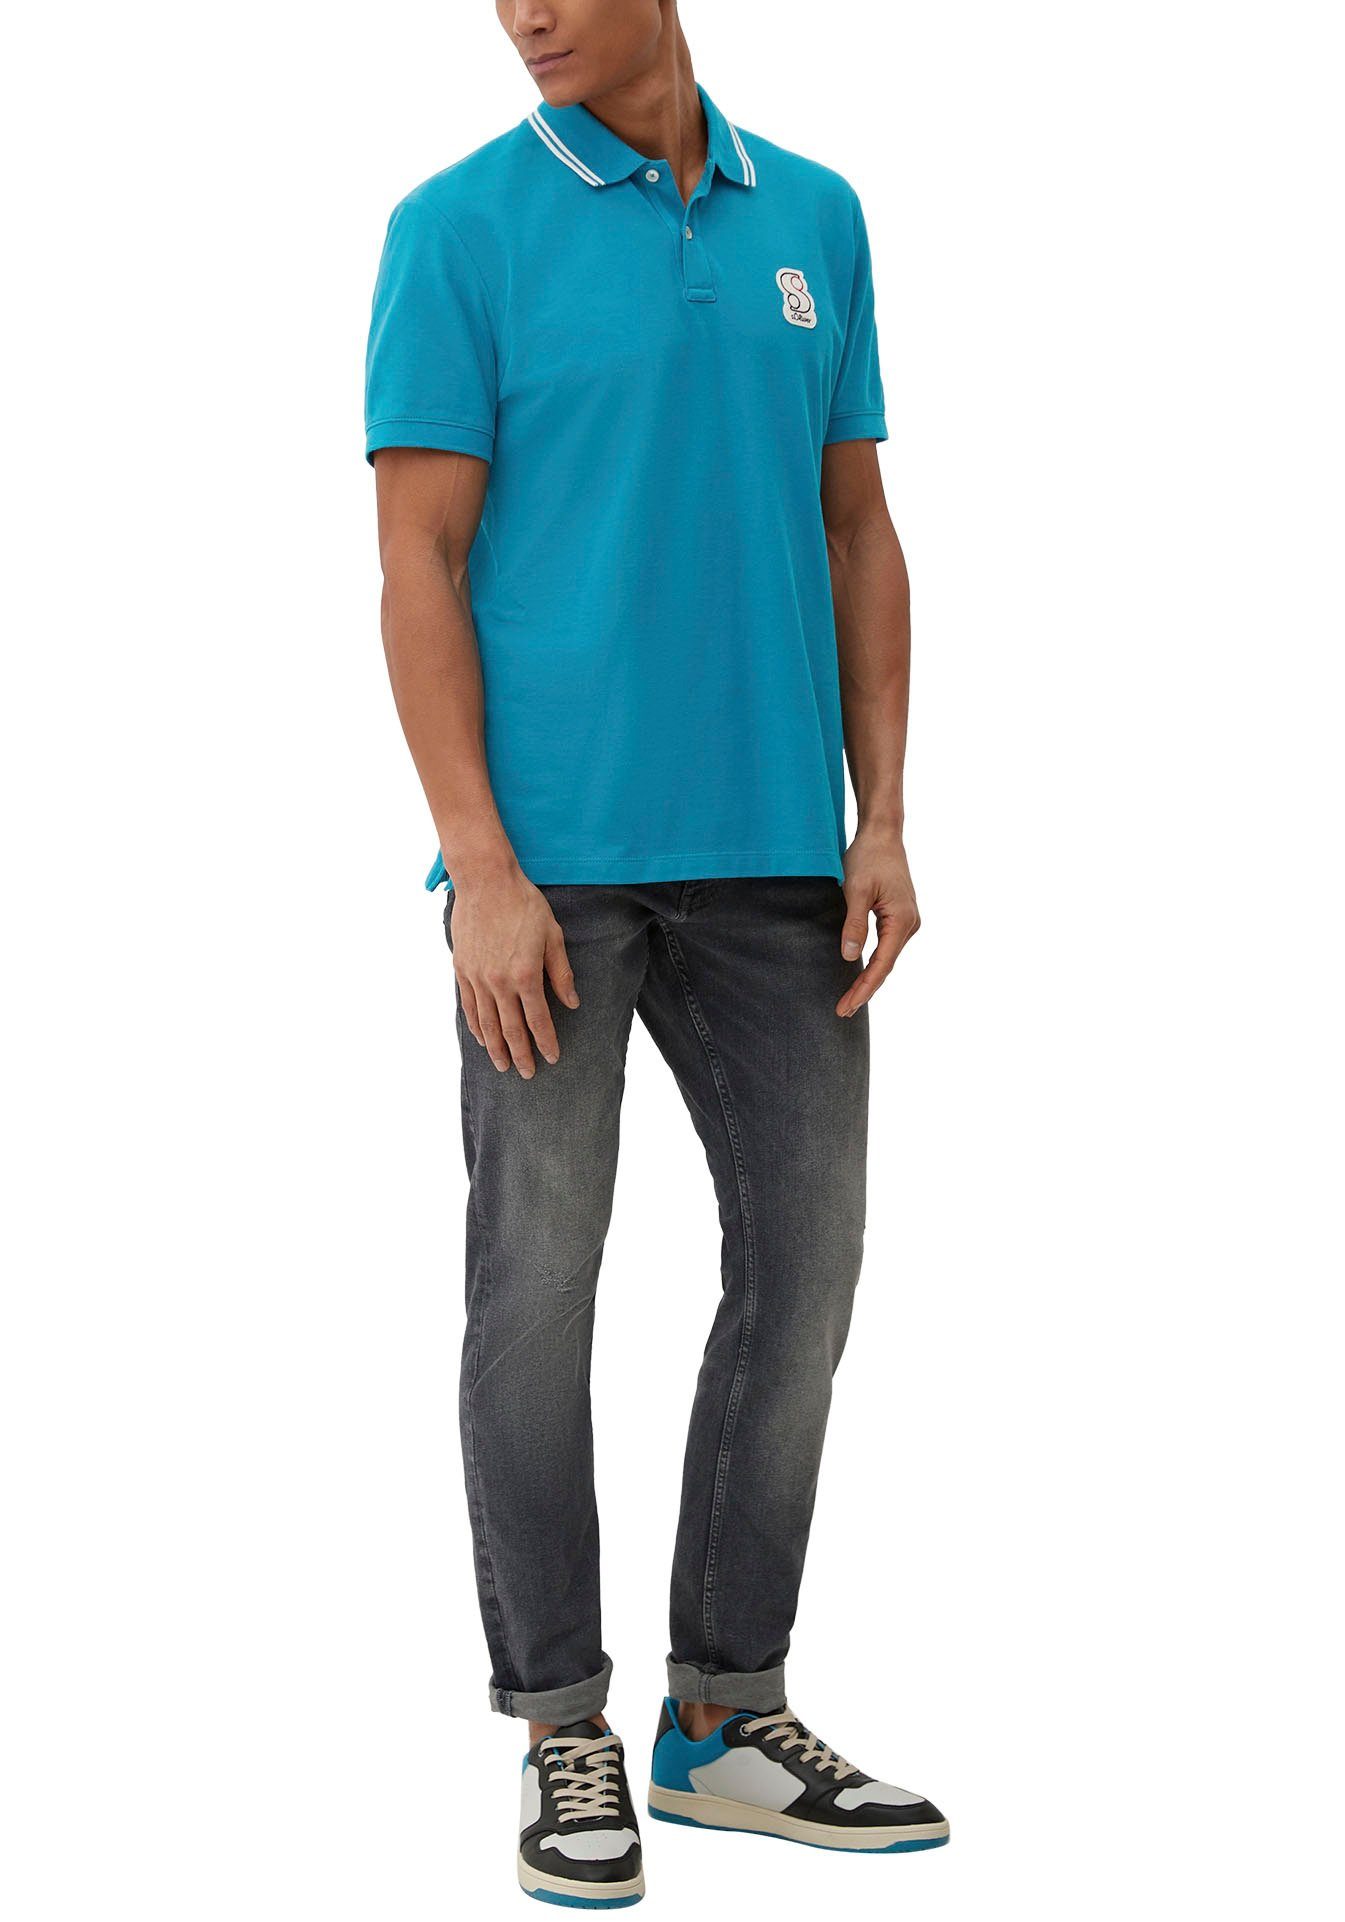 mit Poloshirt blue s.Oliver Labelpatch green